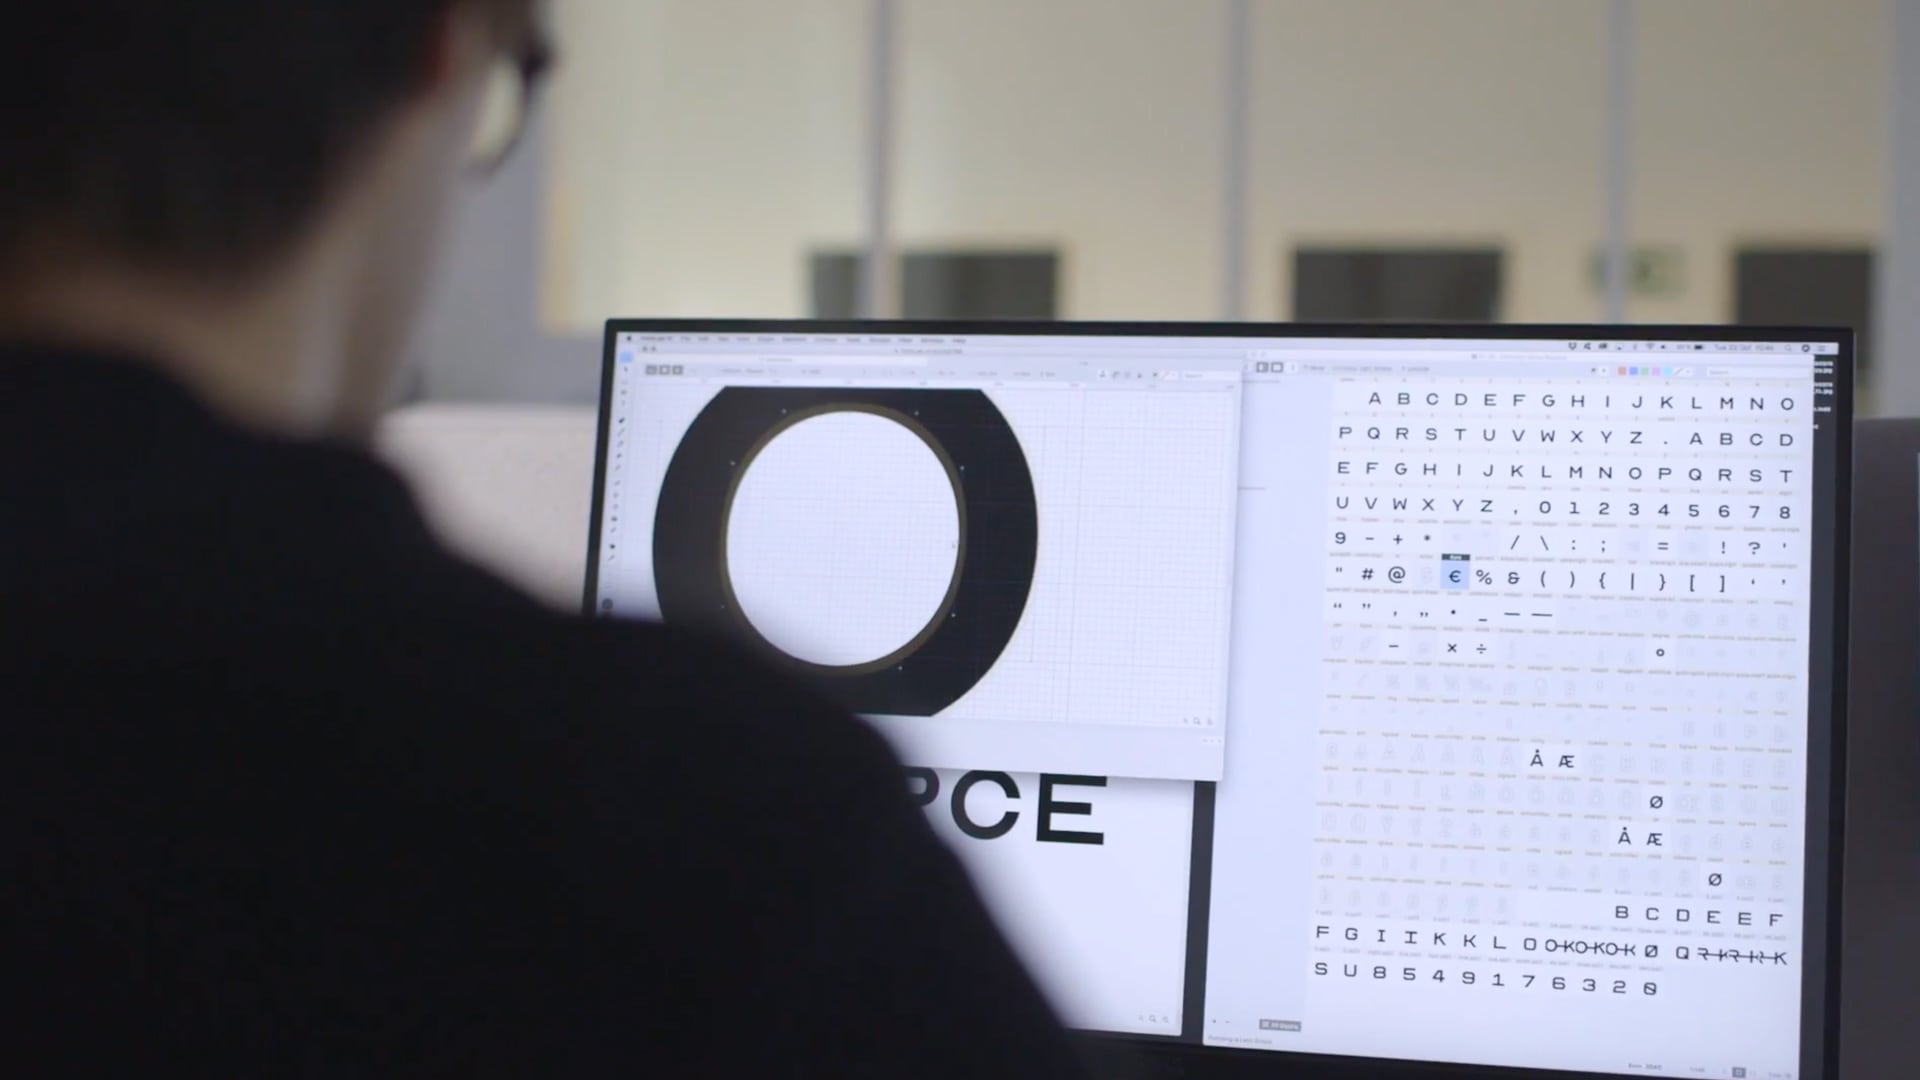 Optician Sans: A Font That Your Eye Remembers